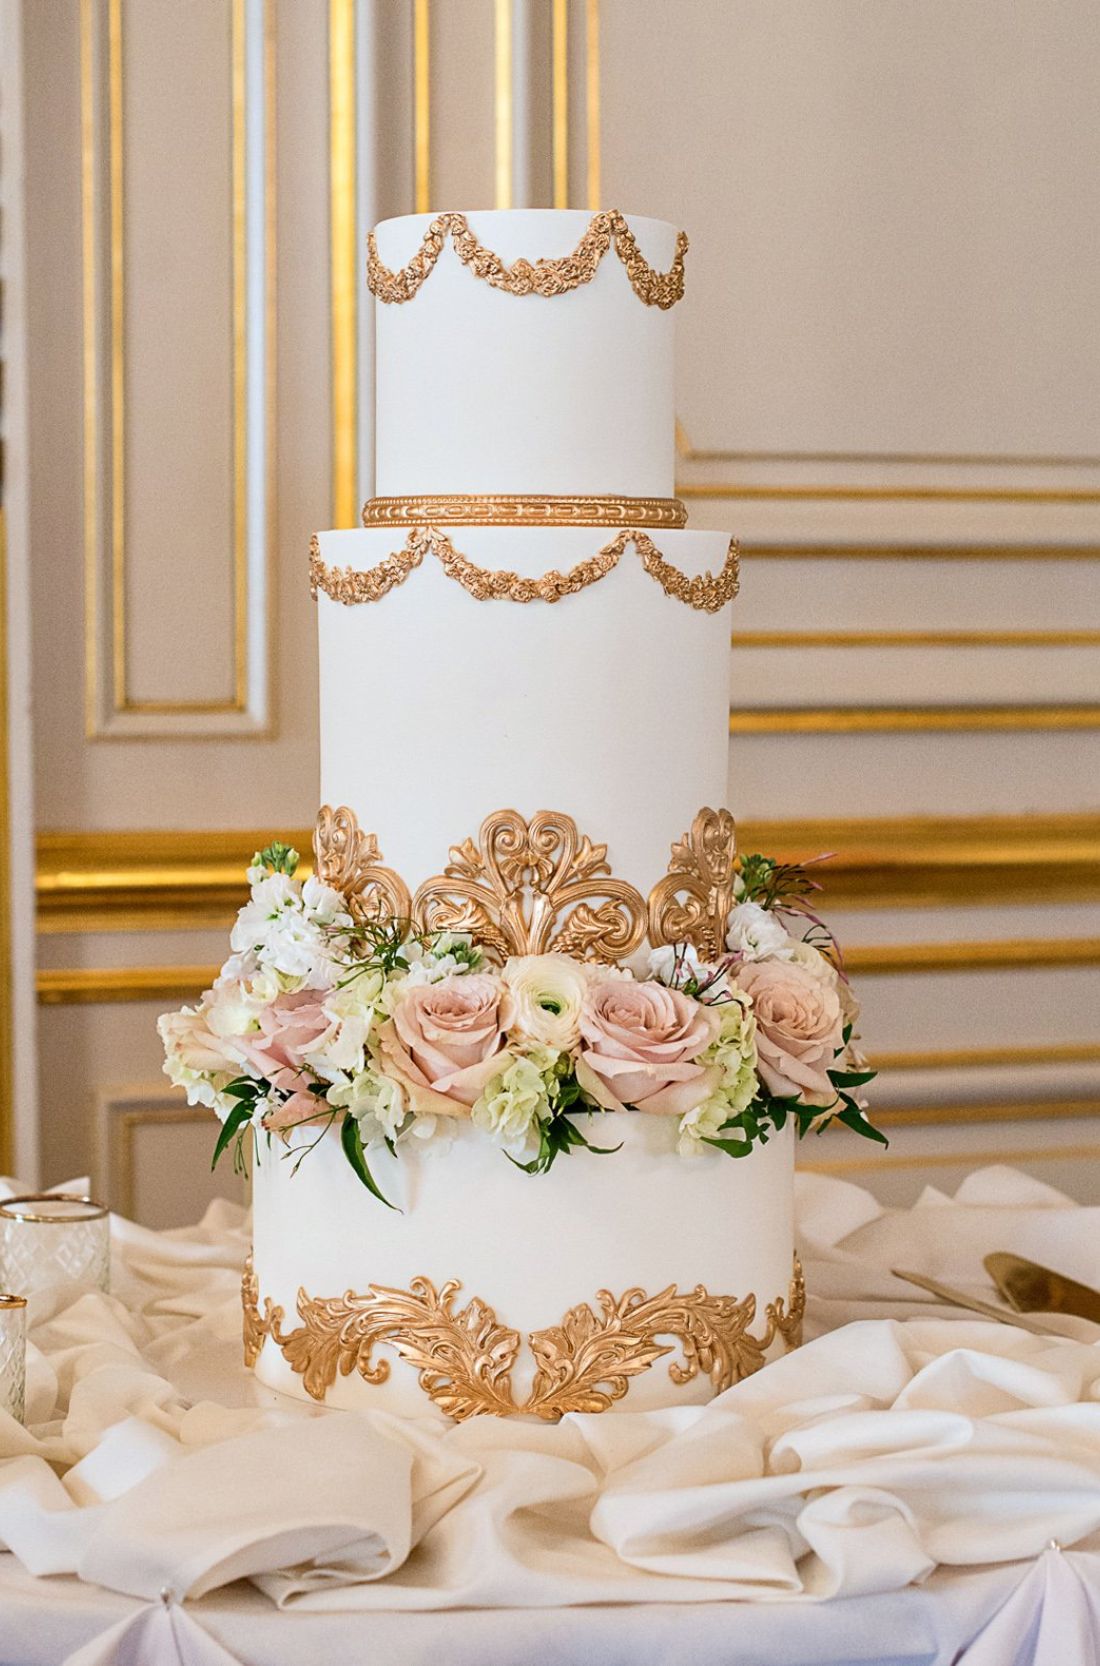 An ornately decorated Quinceañera cake adorned with floral motifs and delicate pearls, embodying tradition and celebration.